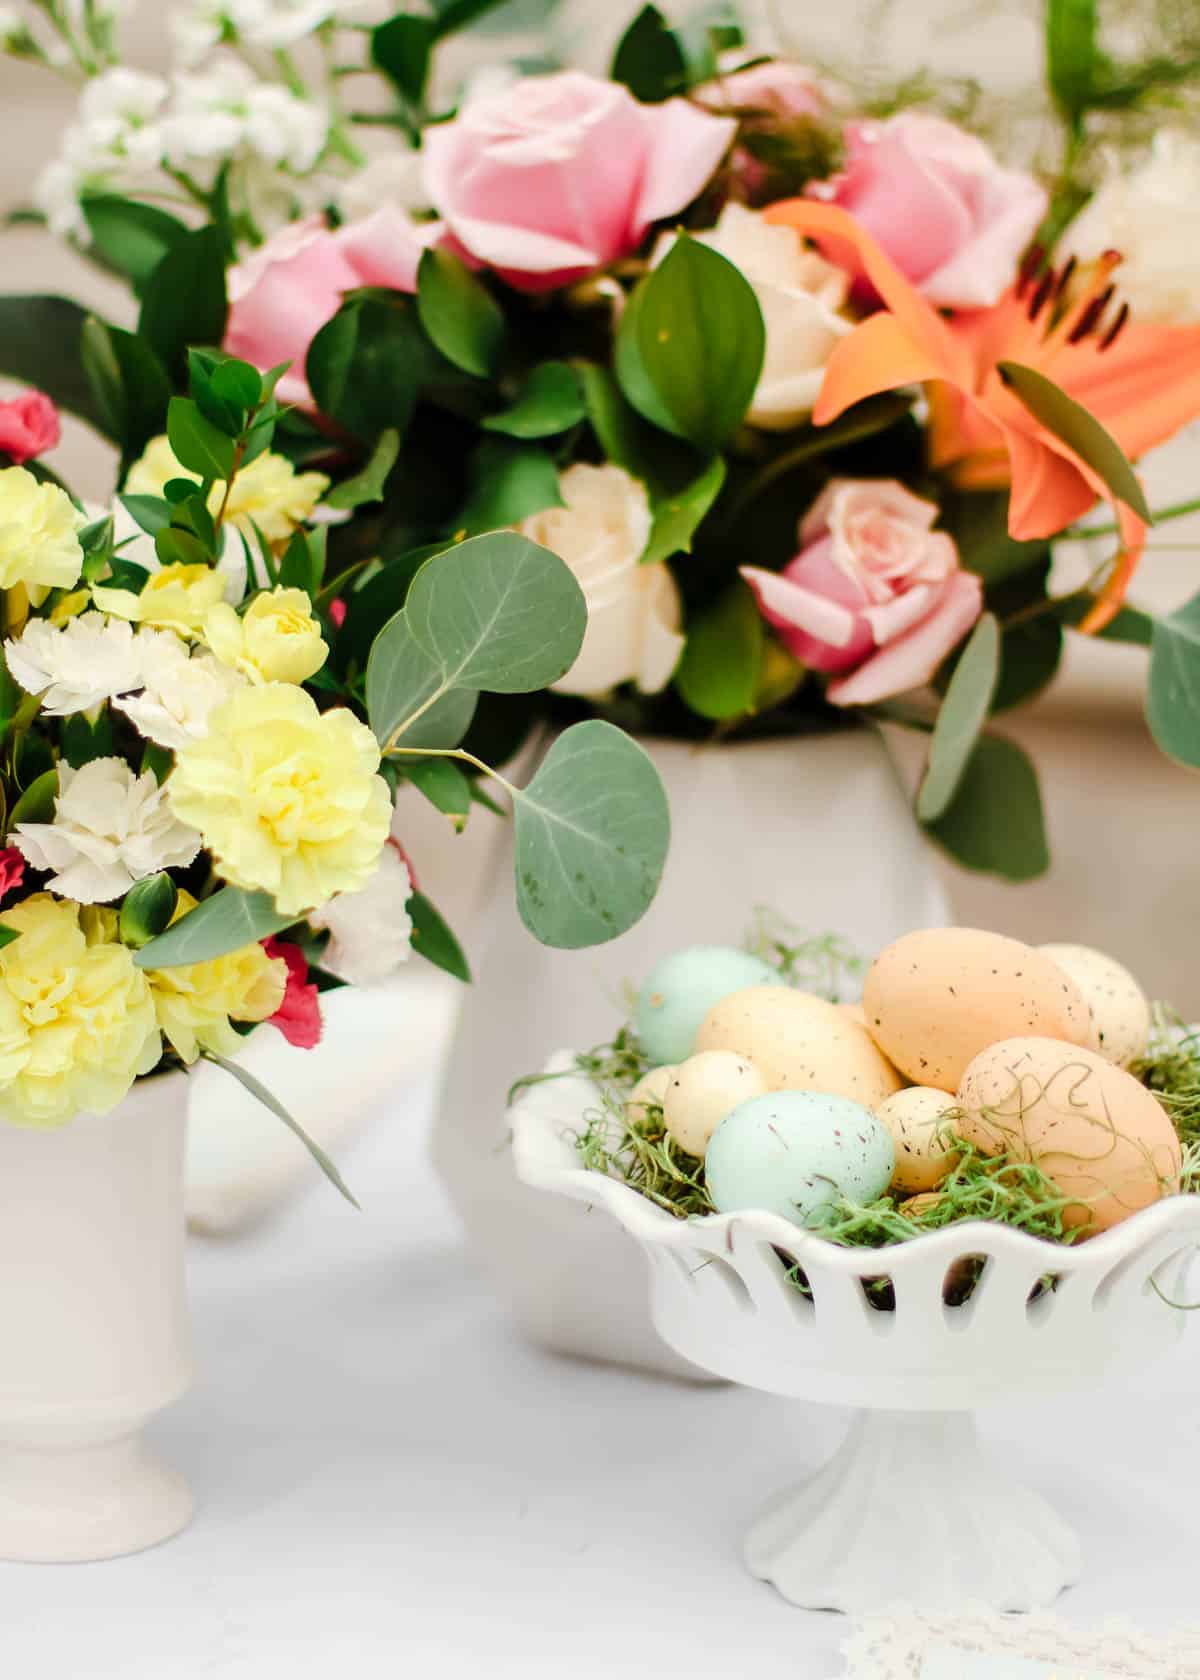 flower arrangements with dish of Easter eggs.